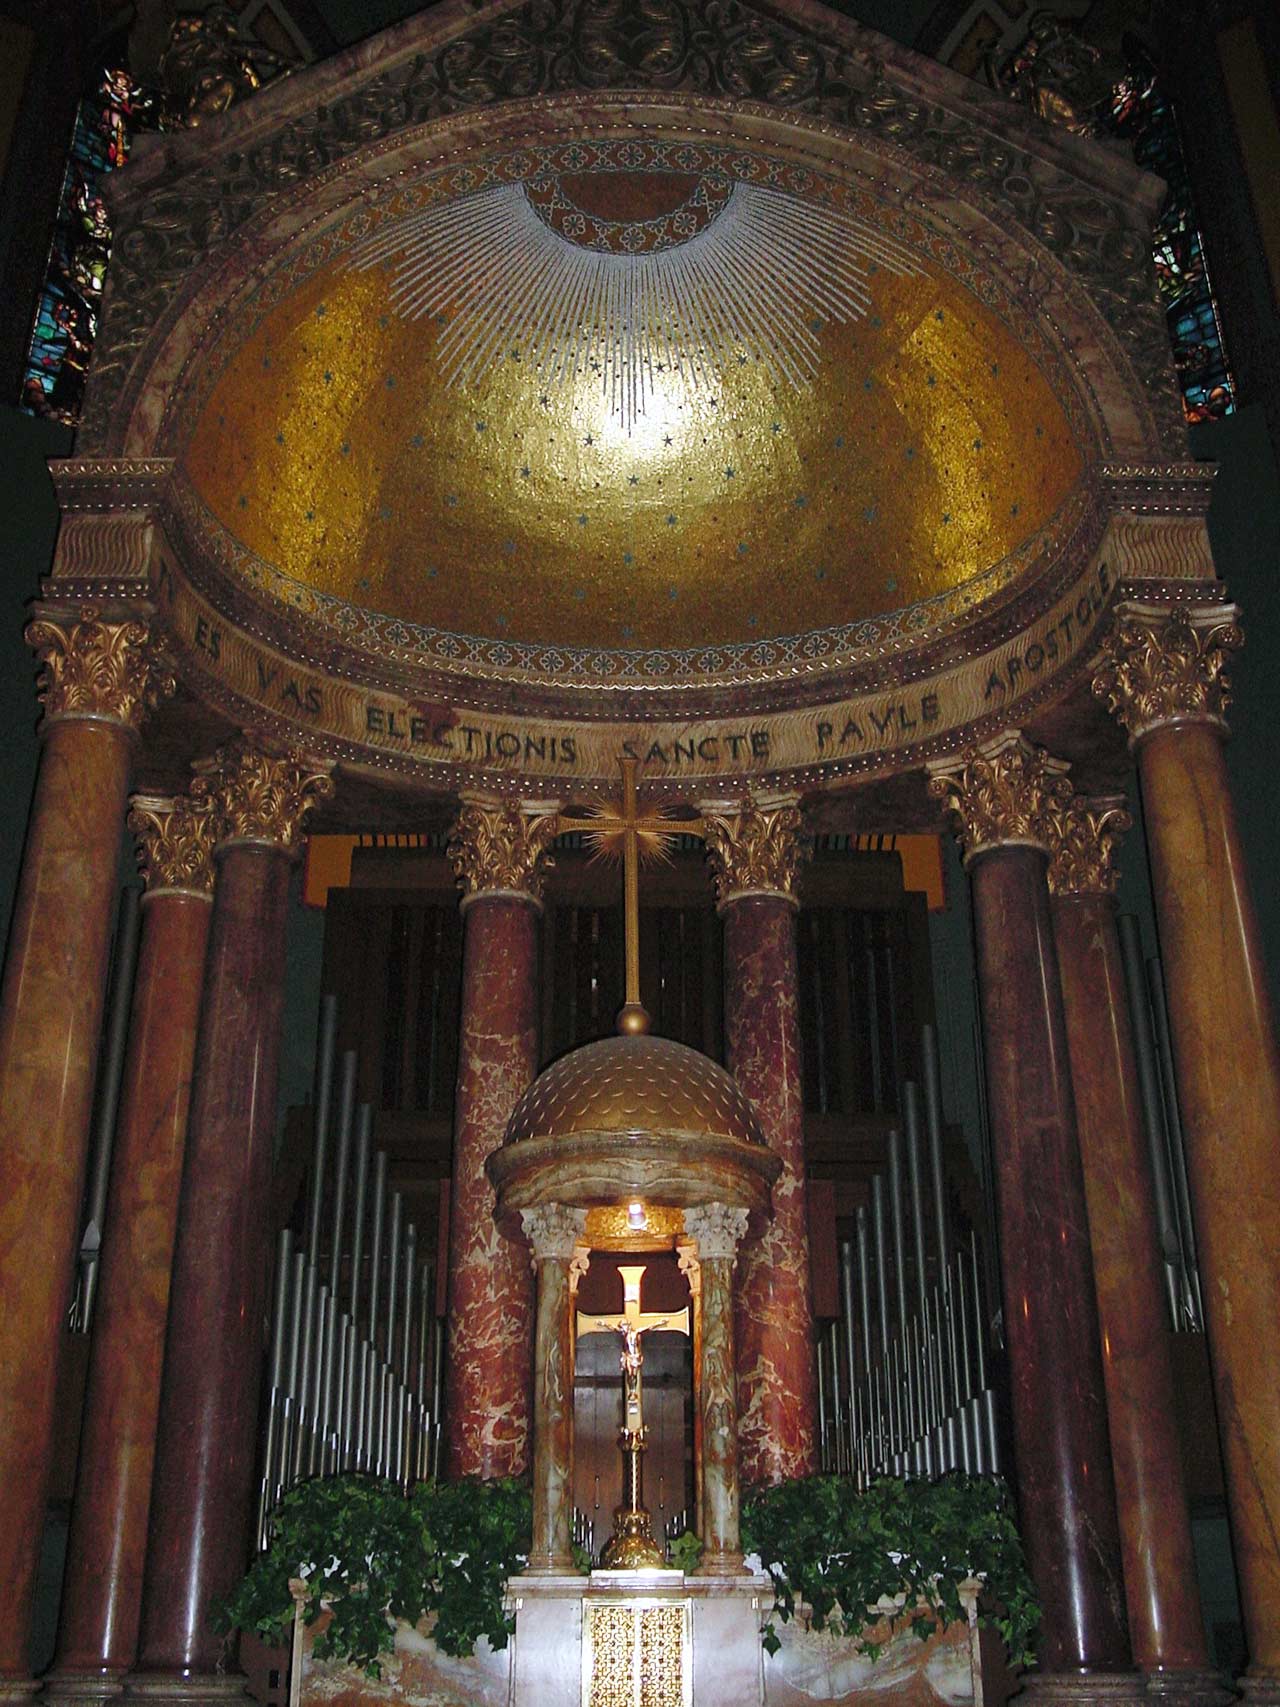 A golden, tiled, starry, half dome above the altar with marble columns supporting the dome.